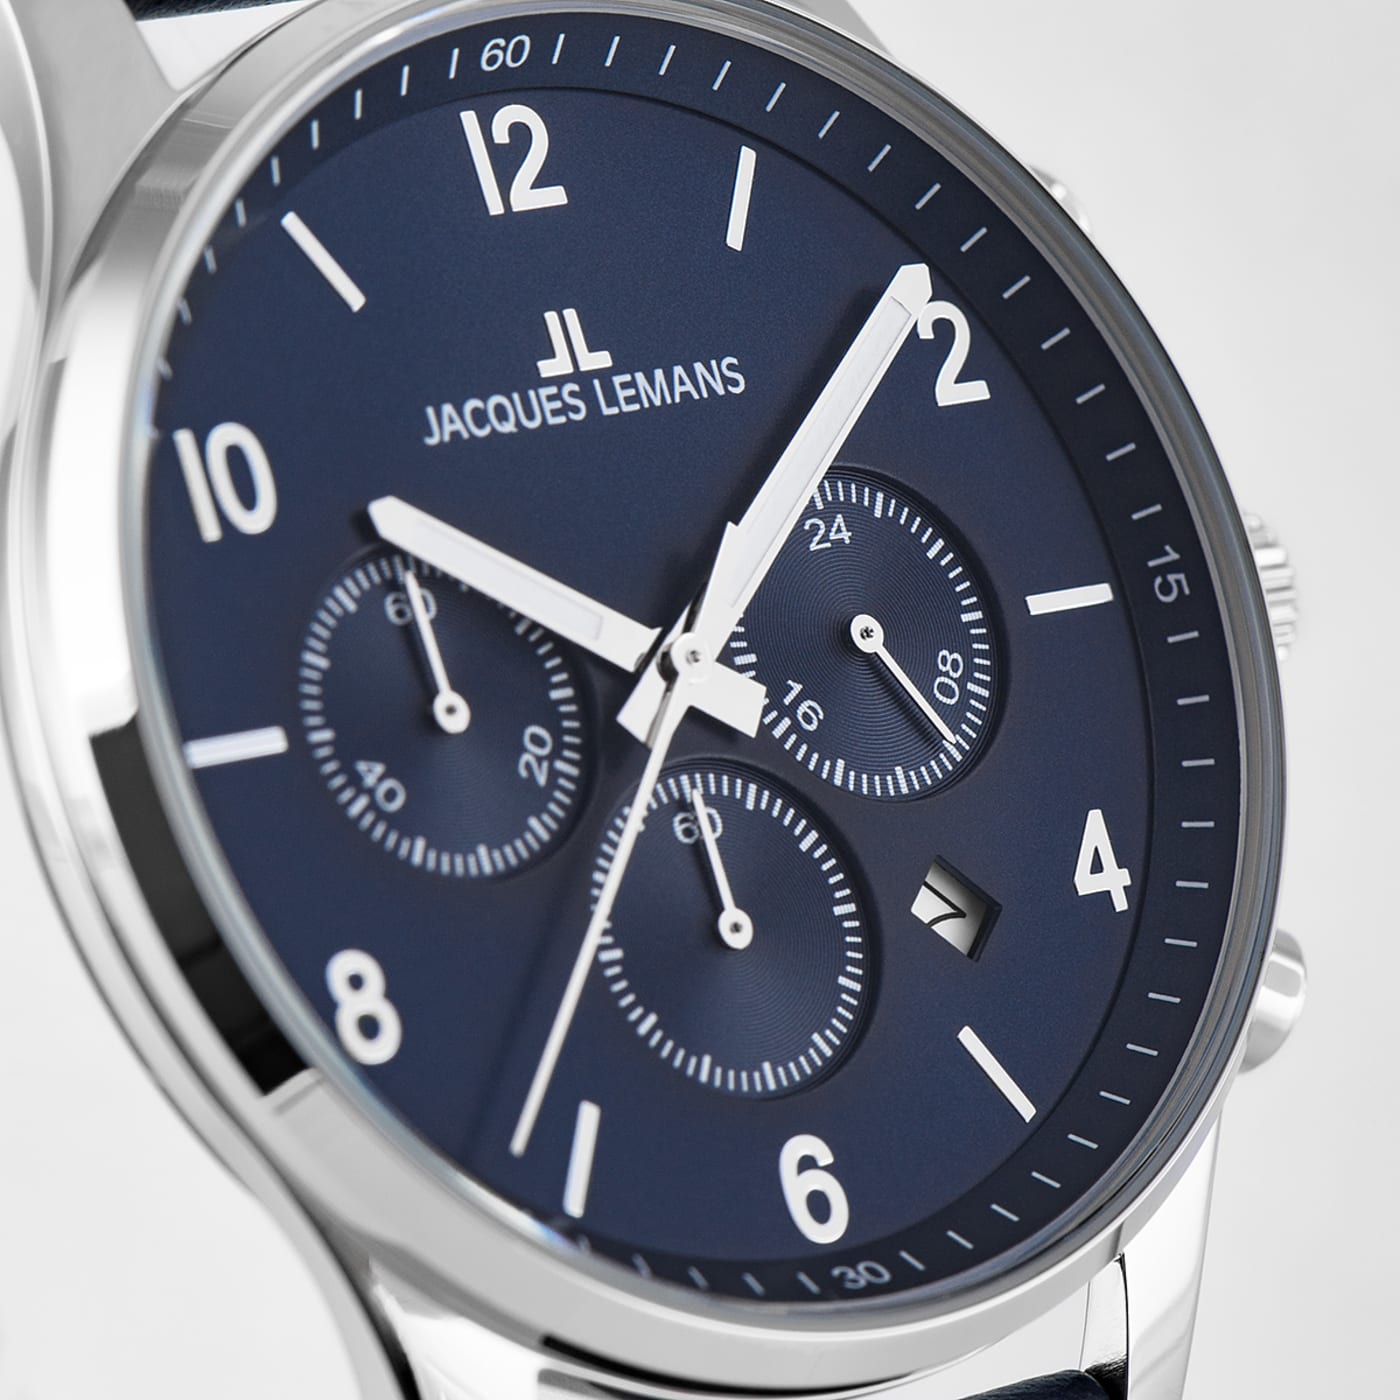 JACQUES LEMANS Classic Men's Watch with Leather Strap, Solid Stainless  Steel, Chronograph, 1-2126 - 193K0A